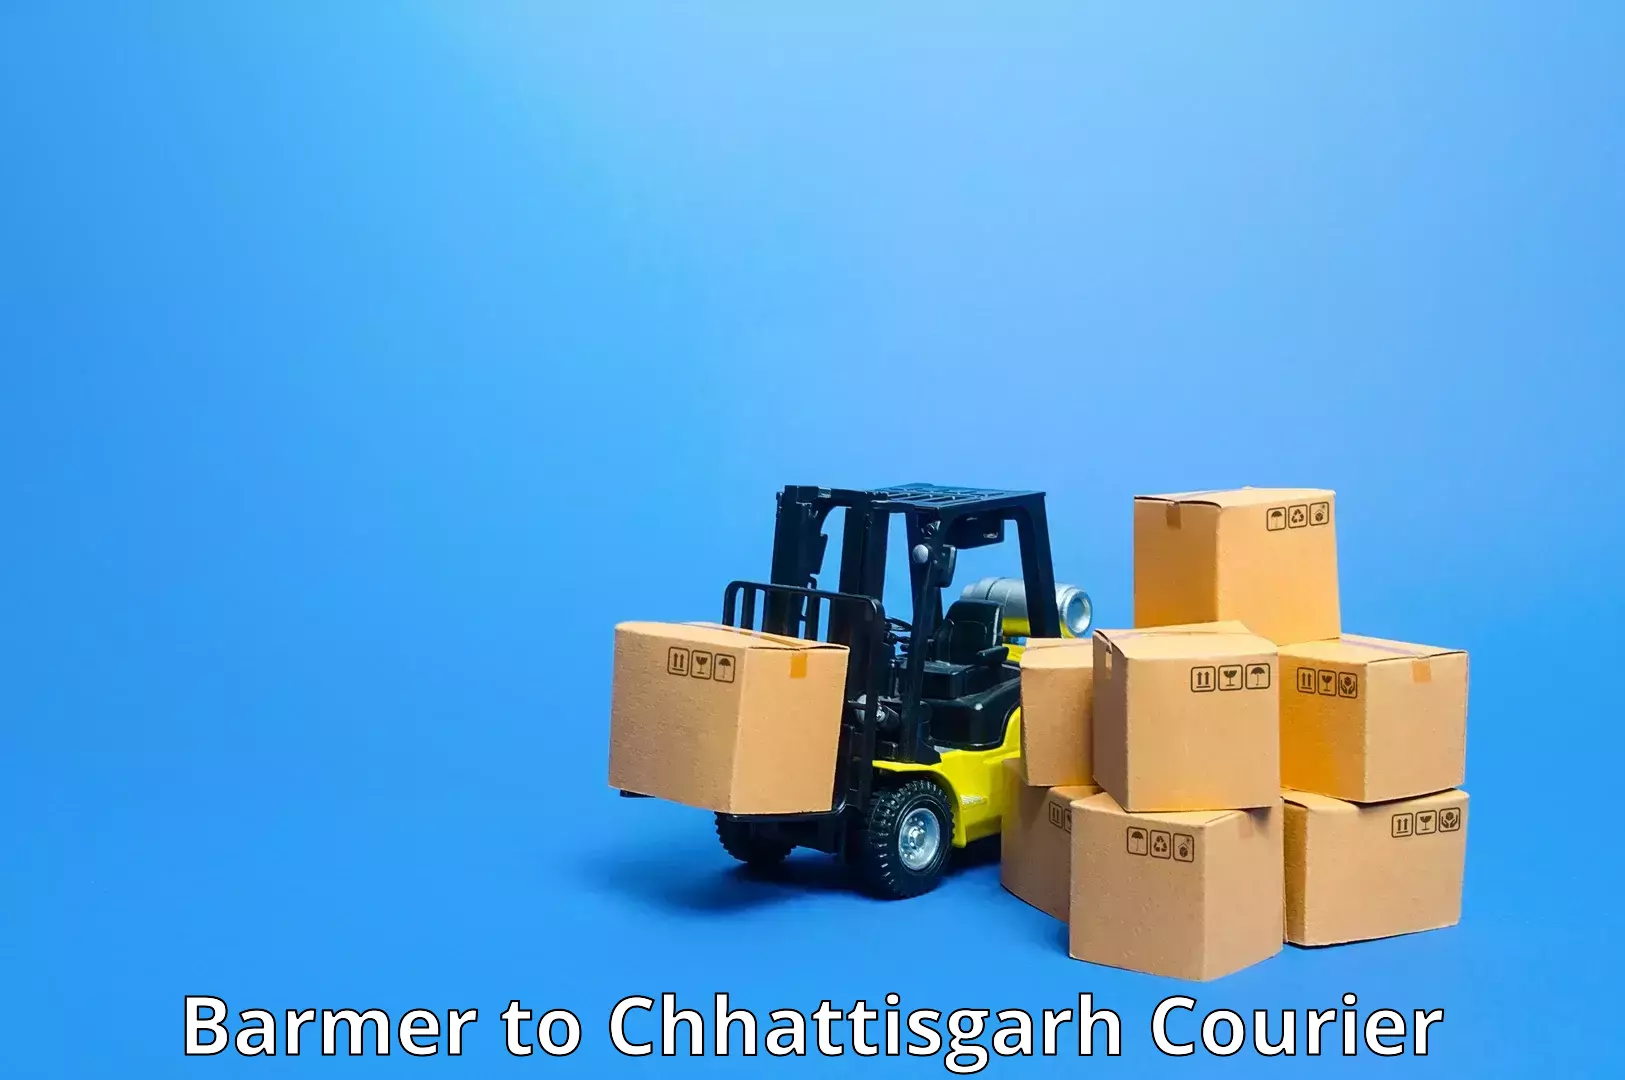 Courier service partnerships Barmer to Pendra